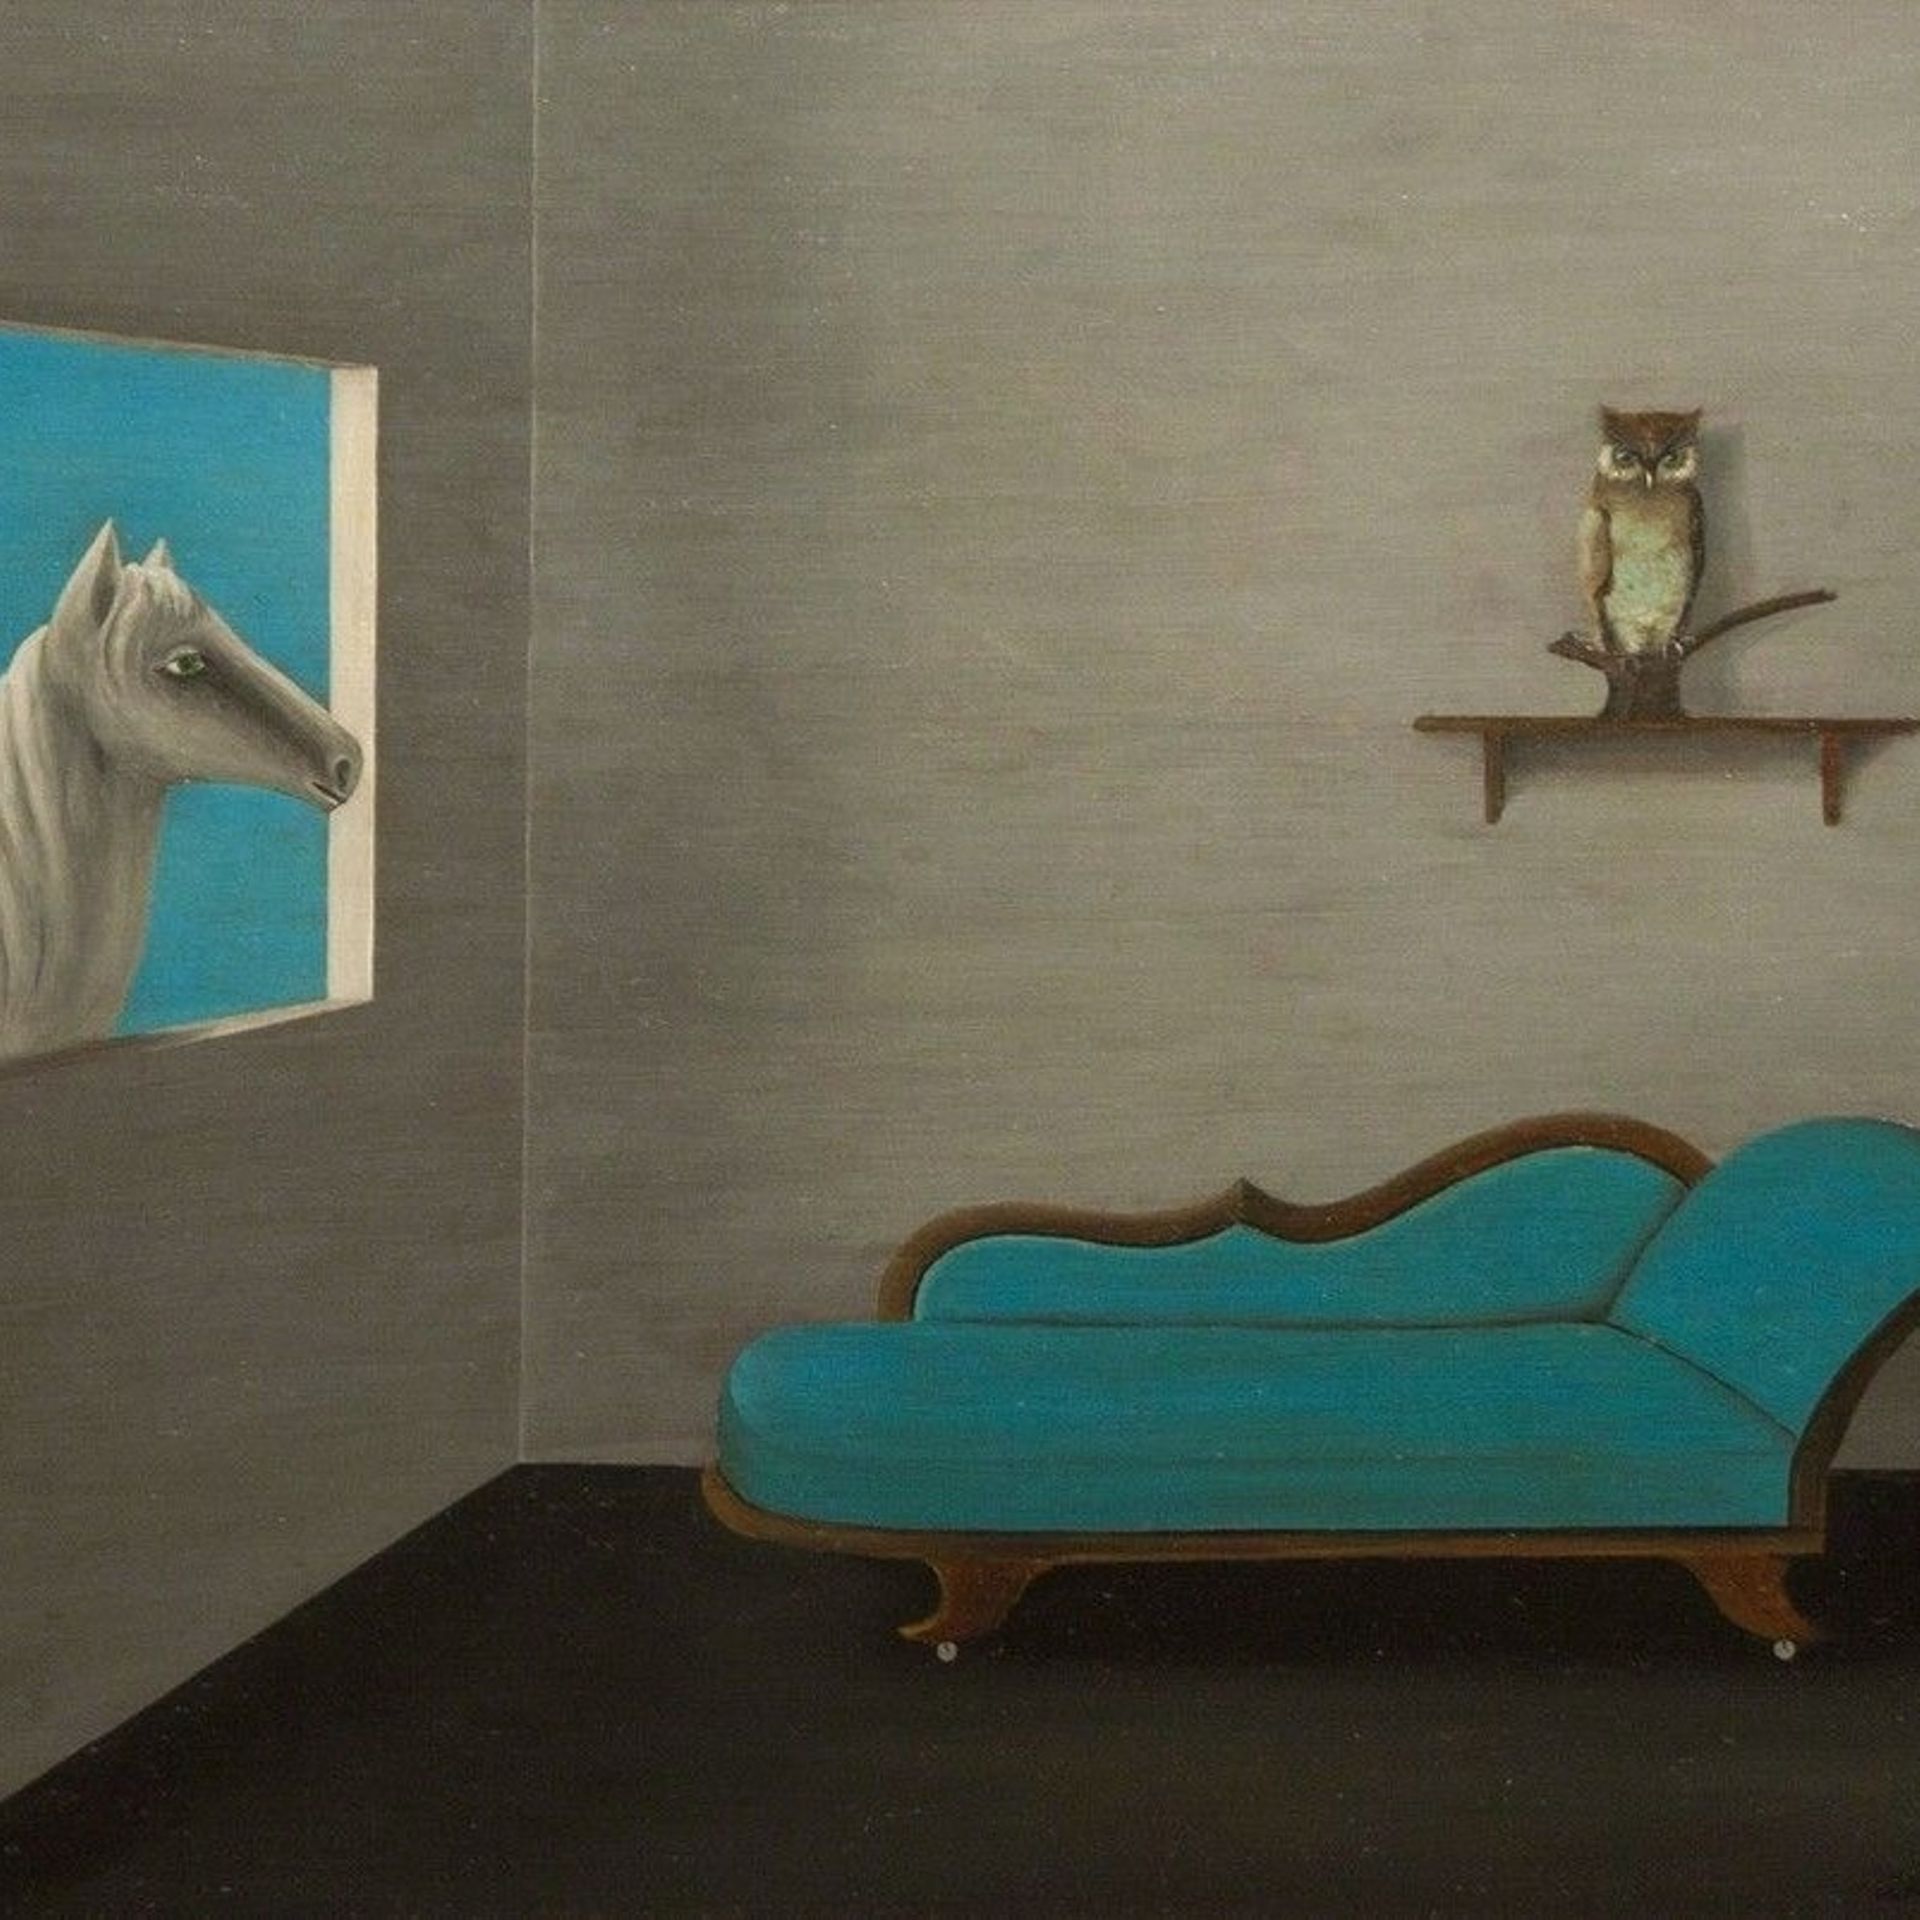 Horse, Owl and Chaise, 1966 - Gertrude Abercombie.